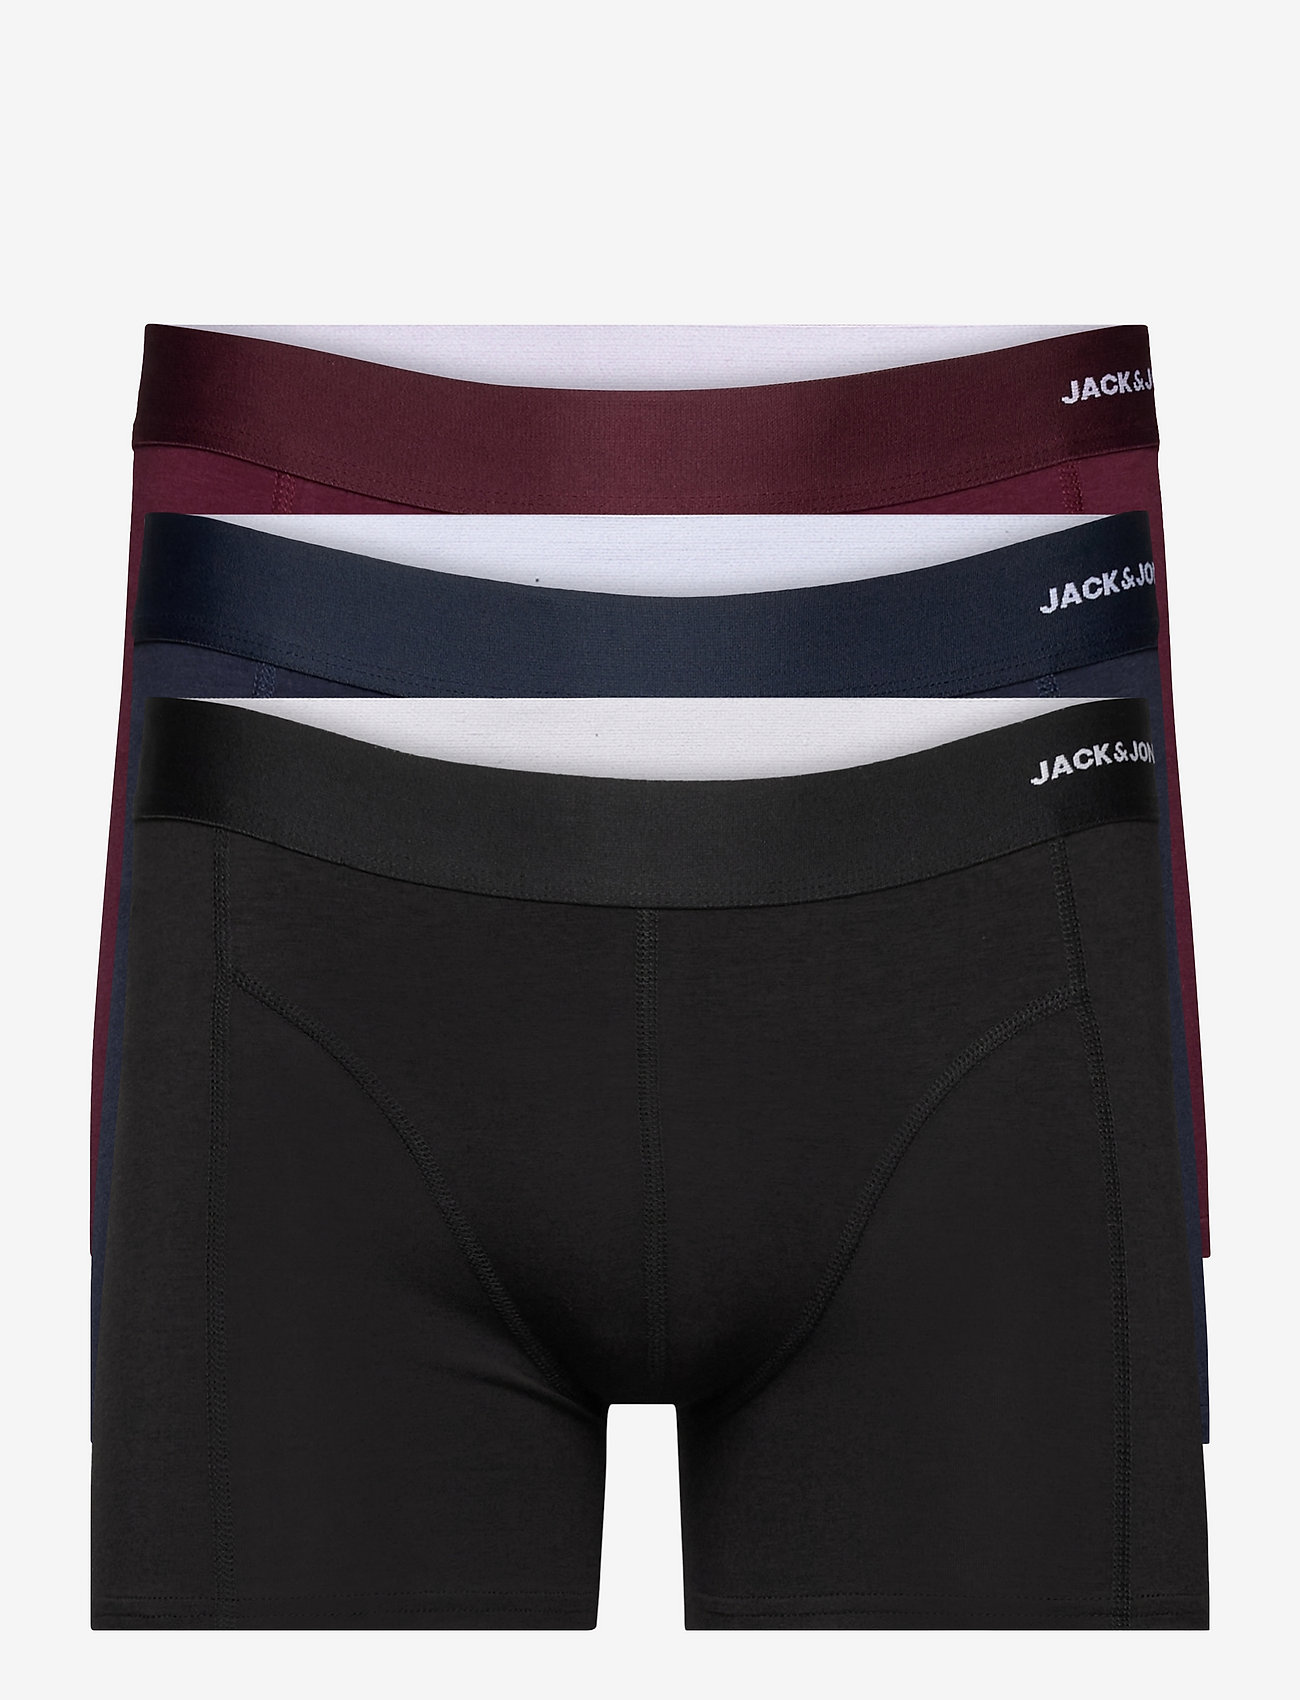 Jack & Jones - JACBASIC BAMBOO TRUNKS 3 PACK NOOS - lowest prices - port royale - 0